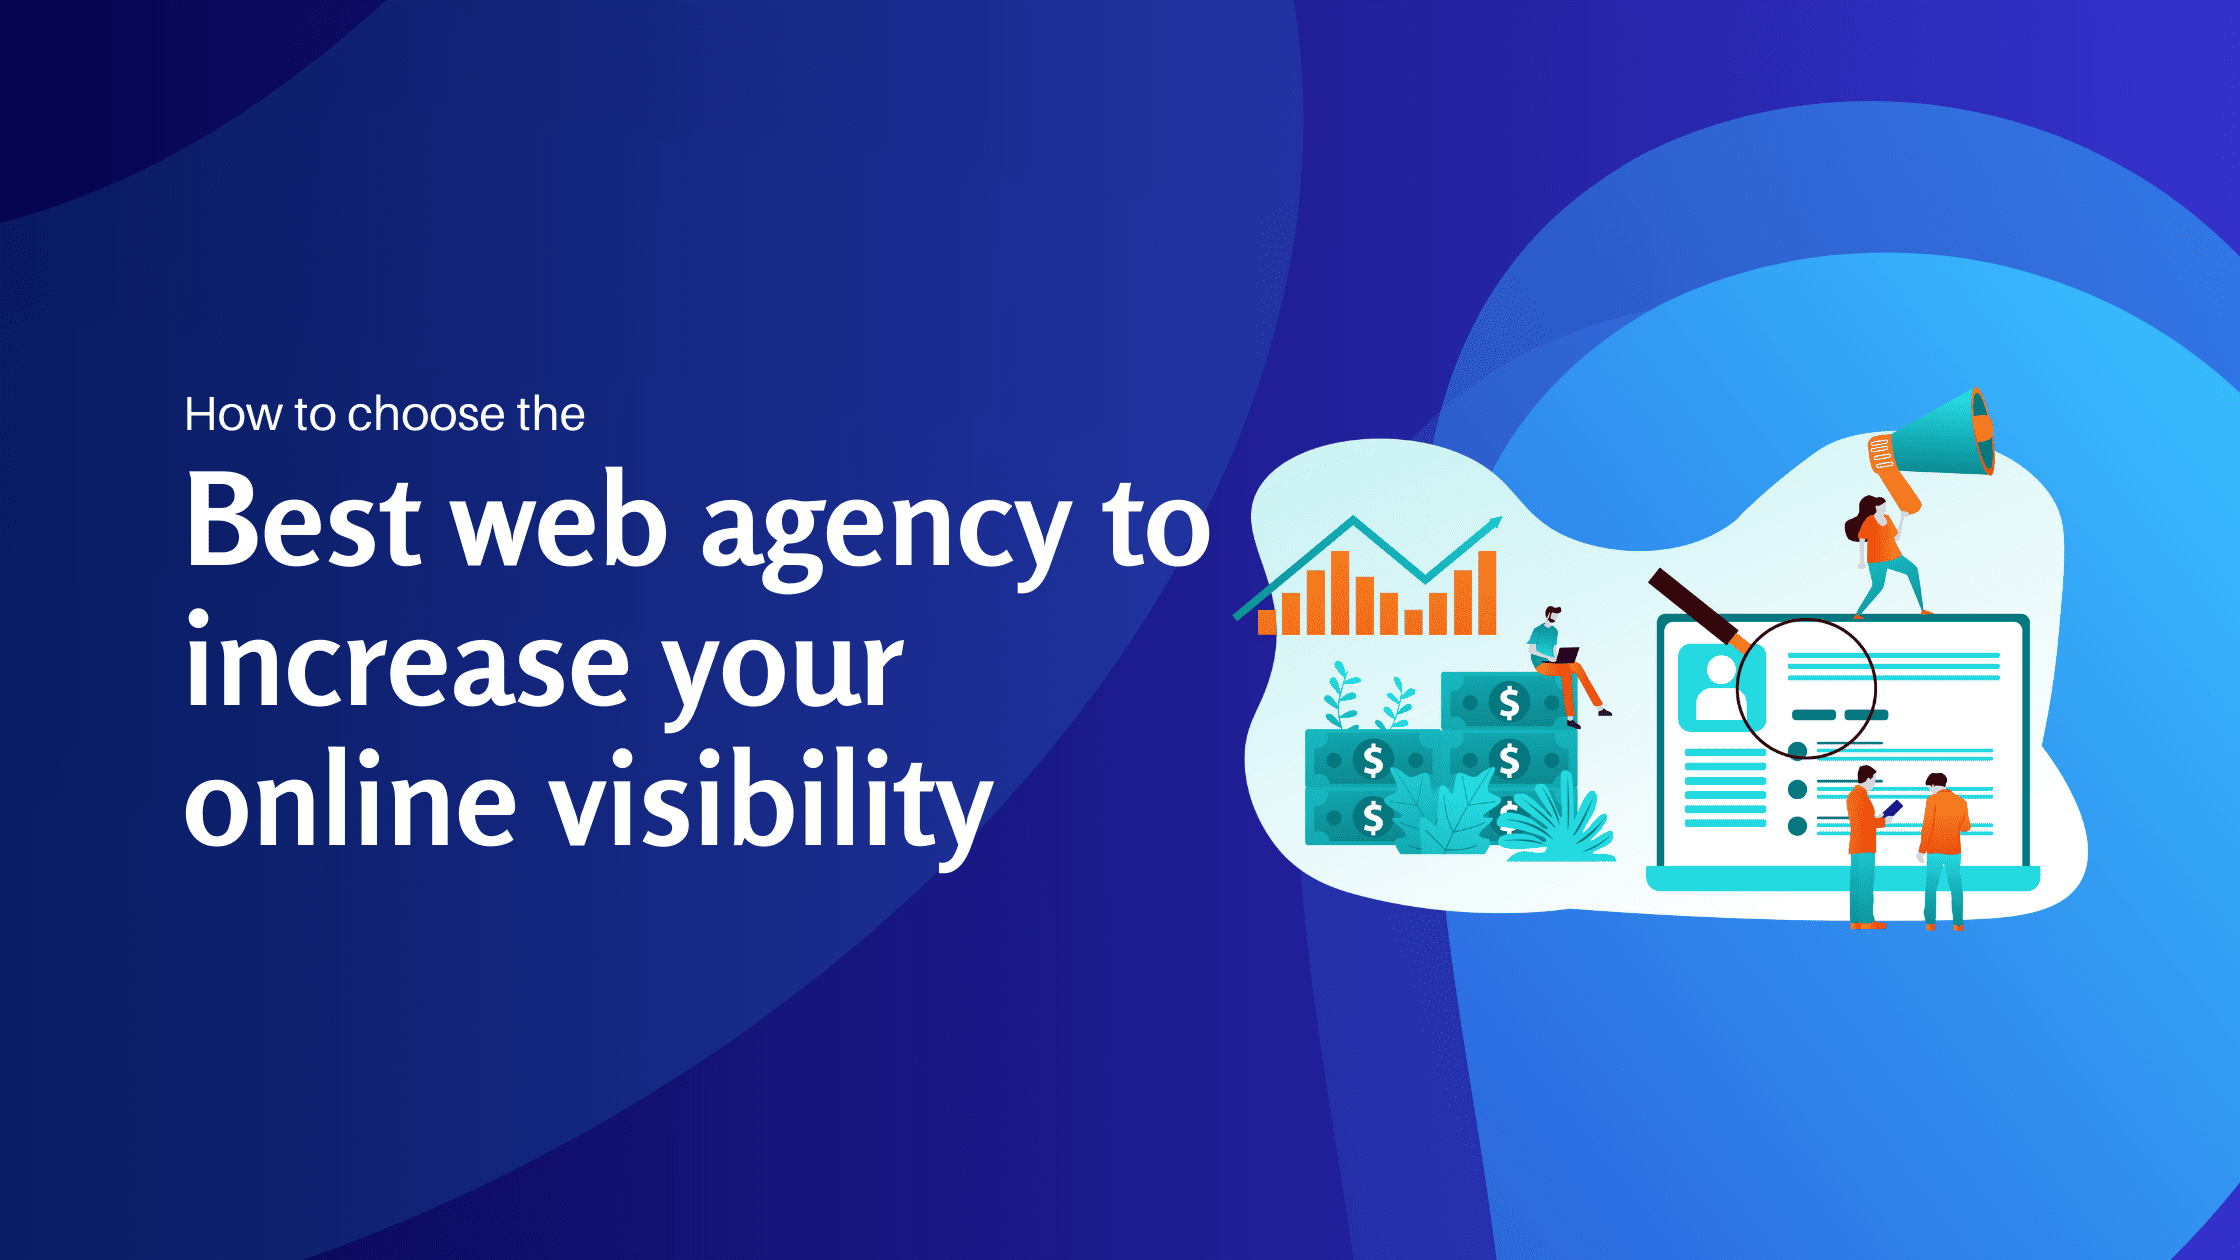 How to choose the best web agency to increase your online visibility - Konectiz